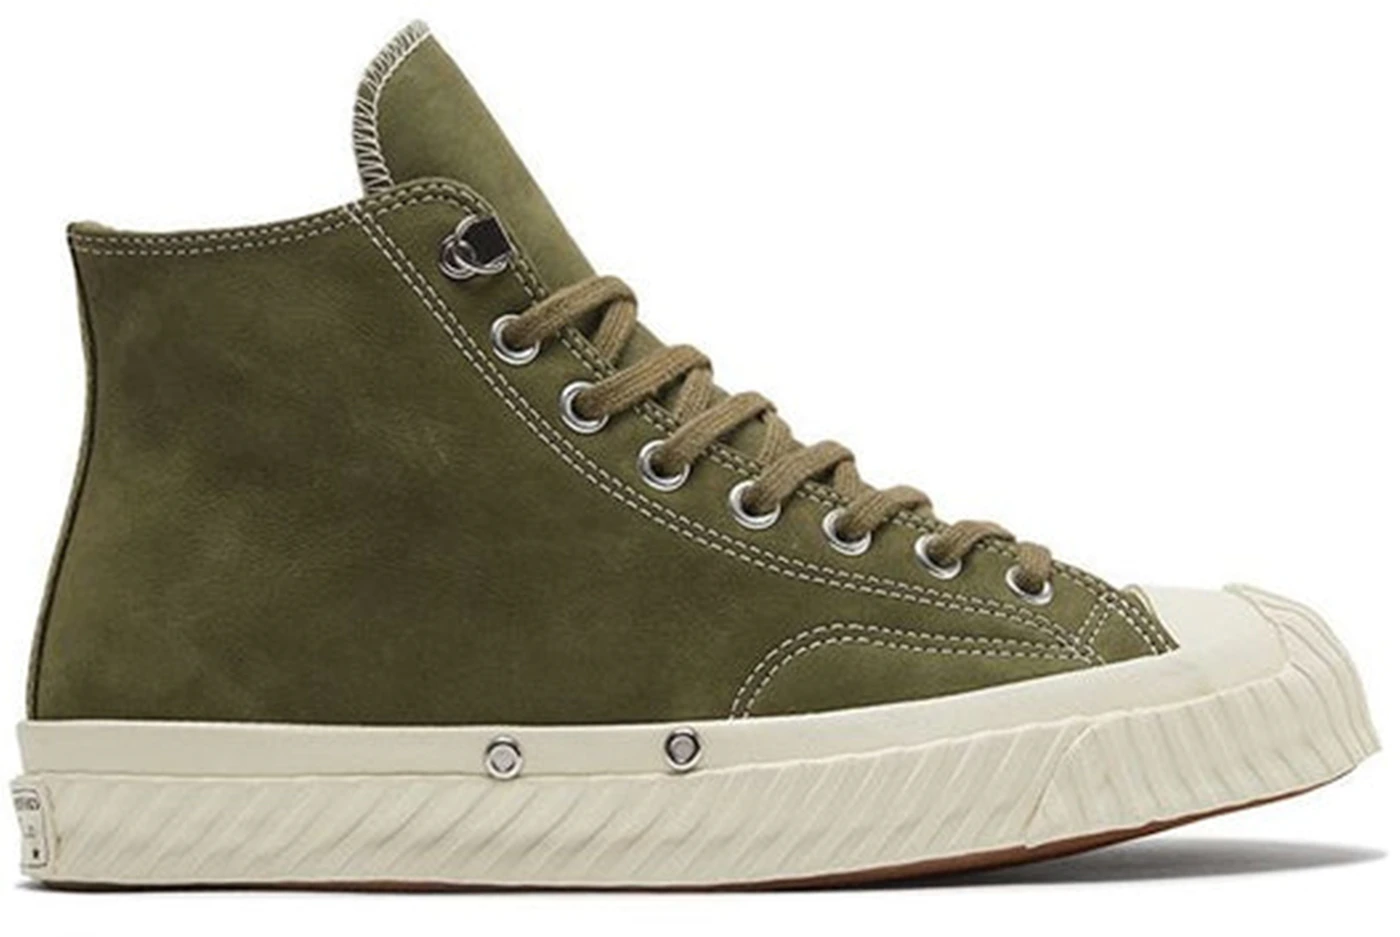 Converse Chuck Taylor All Star 70 Bosey Hi Water Repellent Field ...